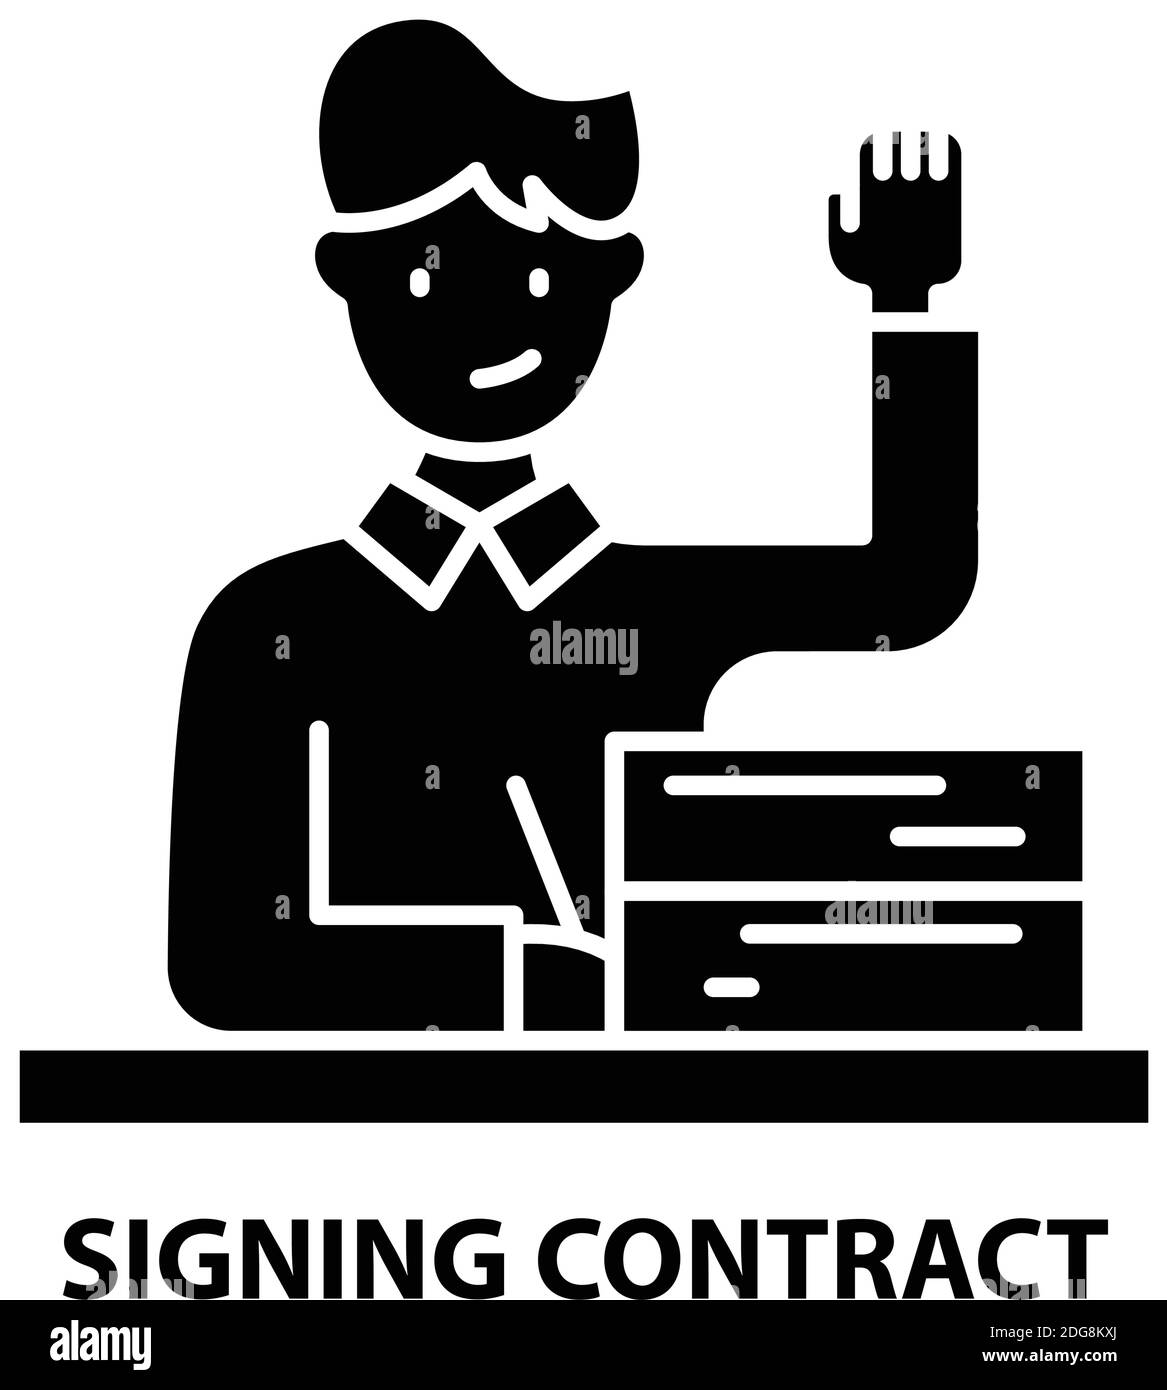 signing contract symbol icon, black vector sign with editable strokes, concept illustration Stock Vector